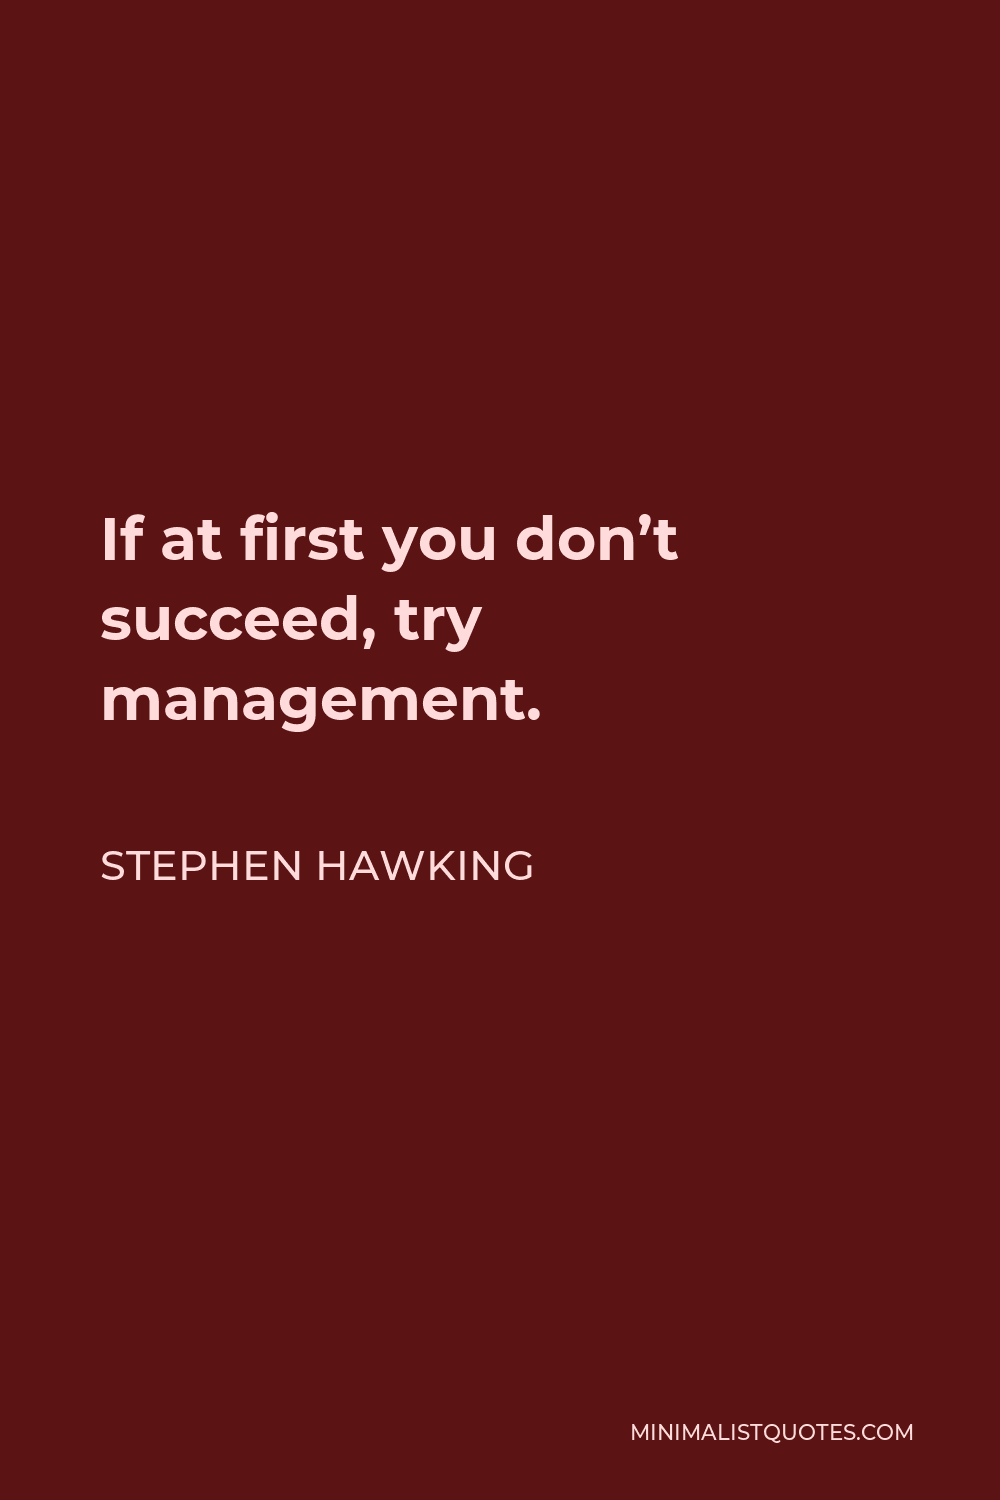 Stephen Hawking Quote - If at first you don’t succeed, try management.